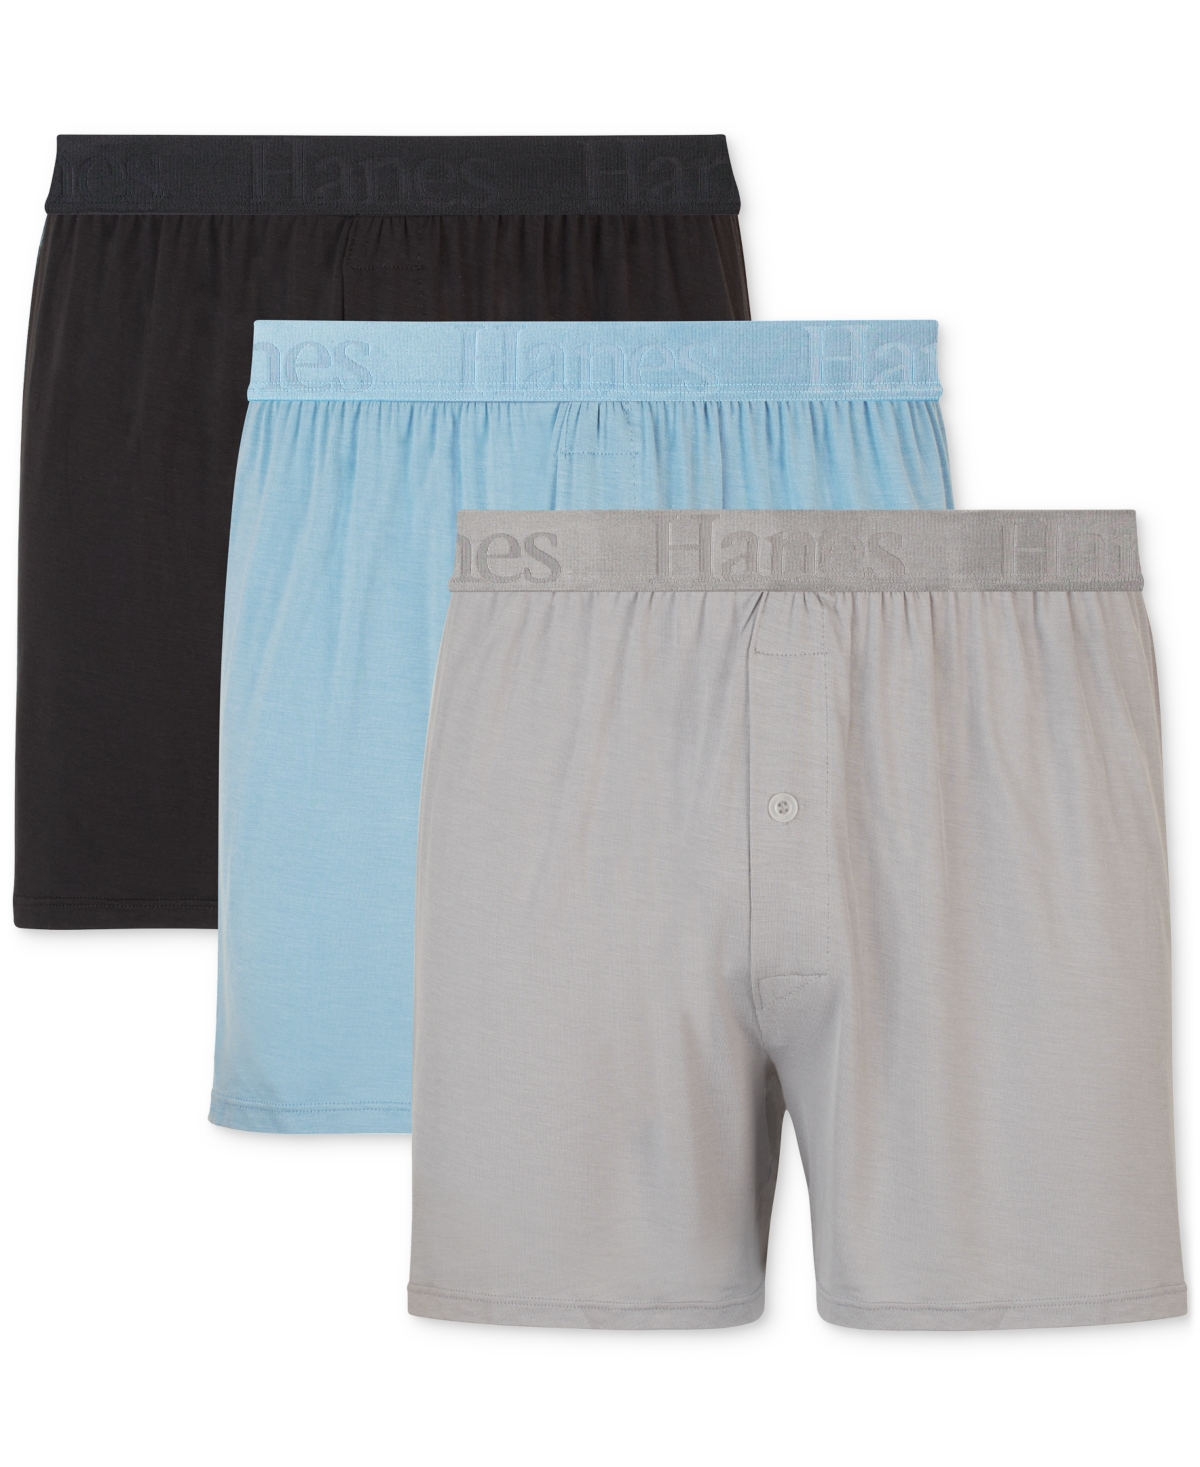 Hanes Men's 3-pk. Modern-fit Stretch Moisture-wicking Boxers In Assorted